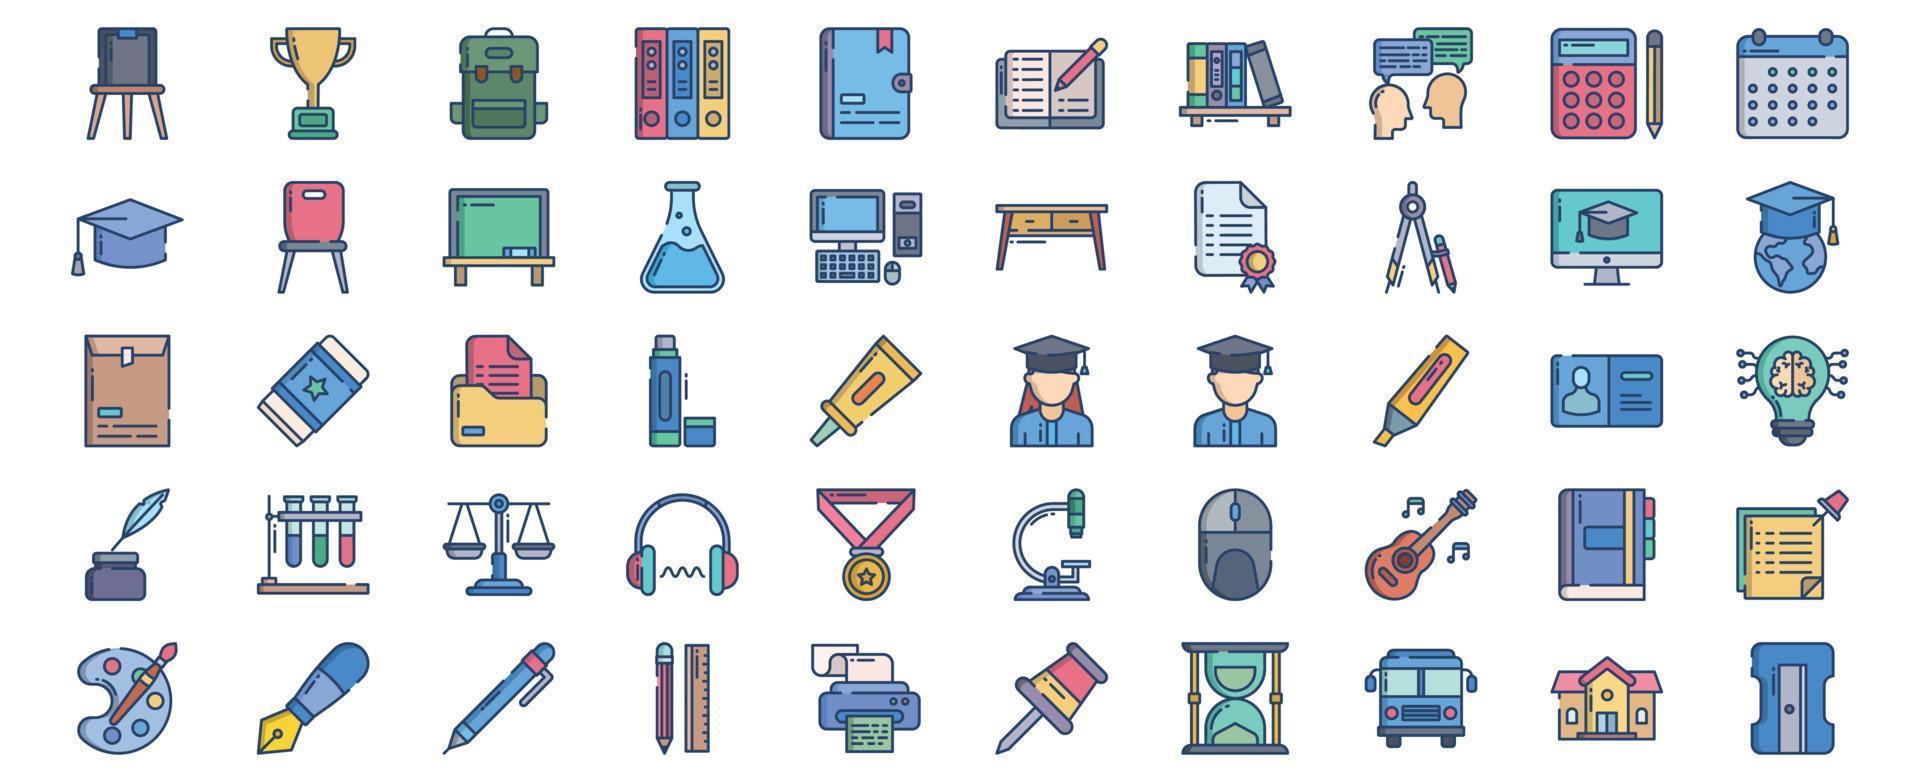 Collection of icons related to Academy and school, including icons like Achievement, Brainstorming, Education, Graduation and more. vector illustrations, Pixel Perfect set